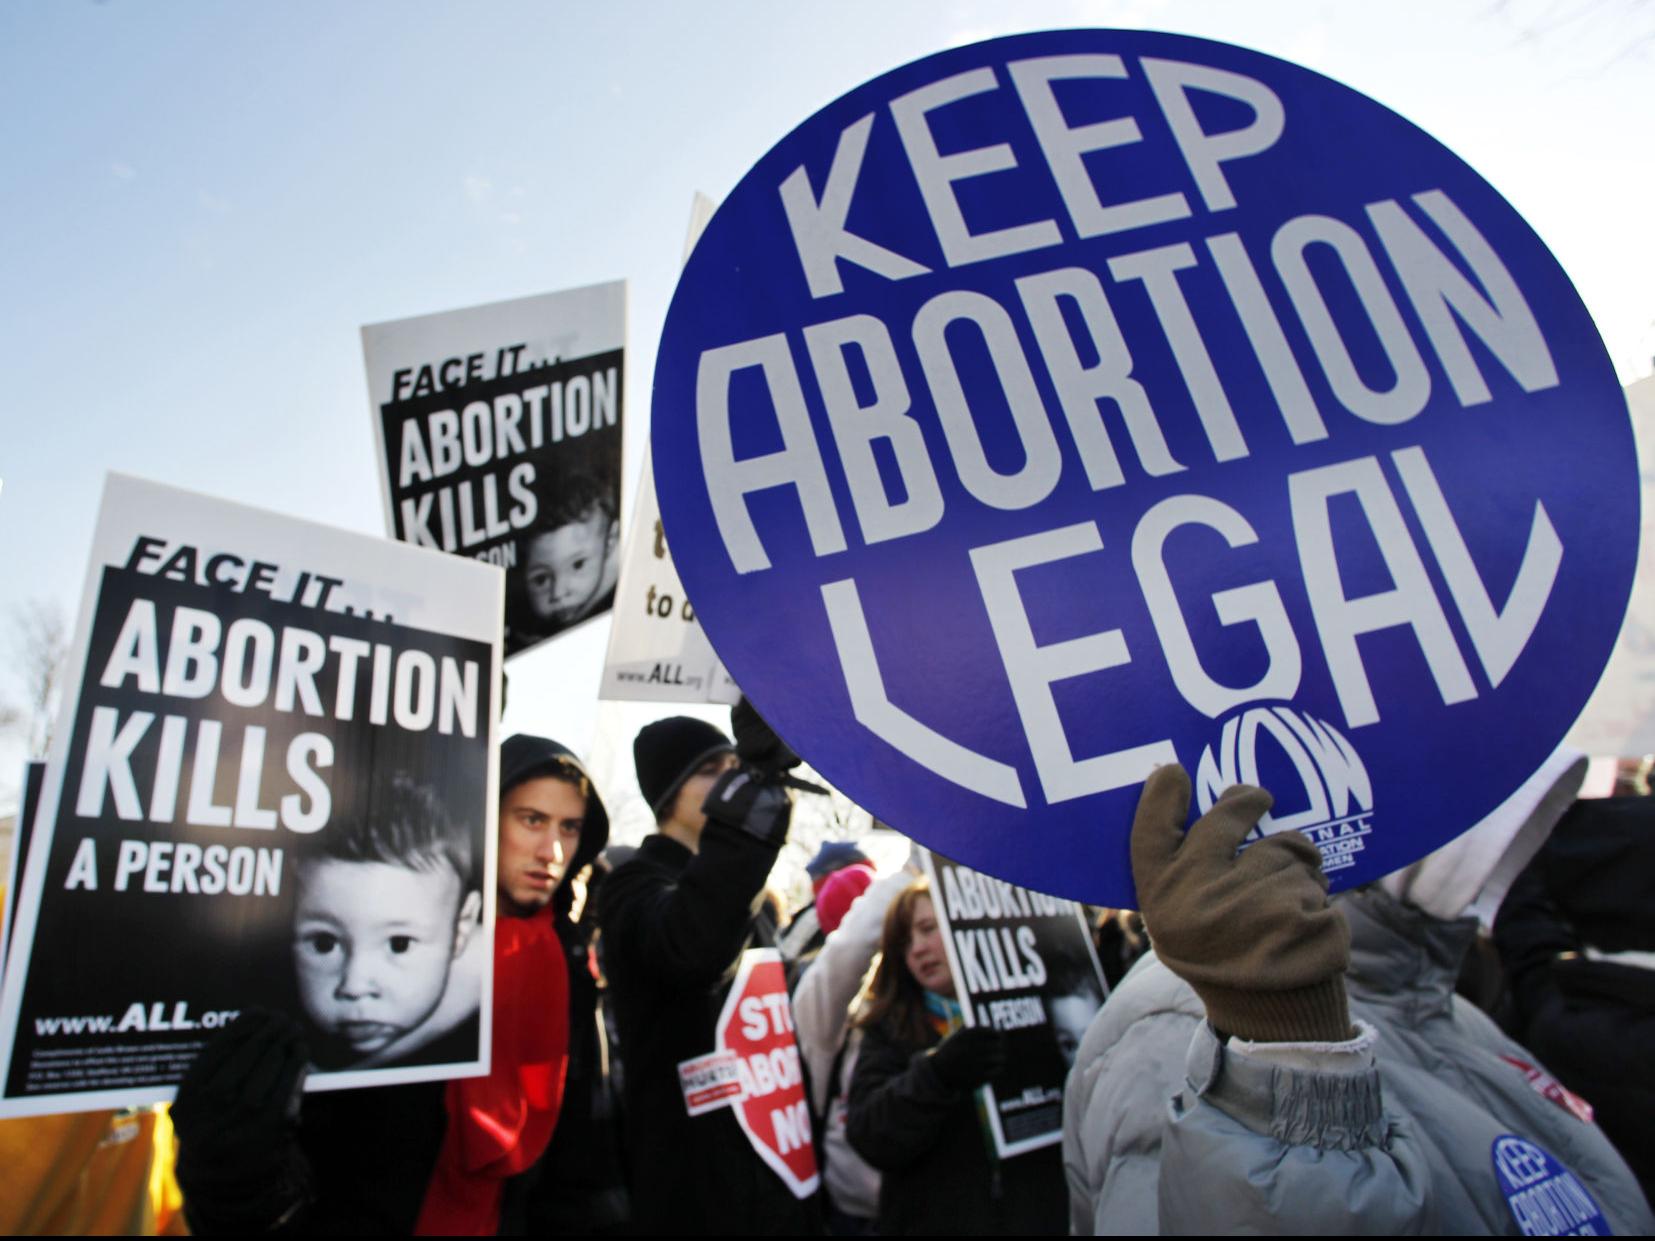 Supreme Court Rejects Louisiana Abortion Regulations